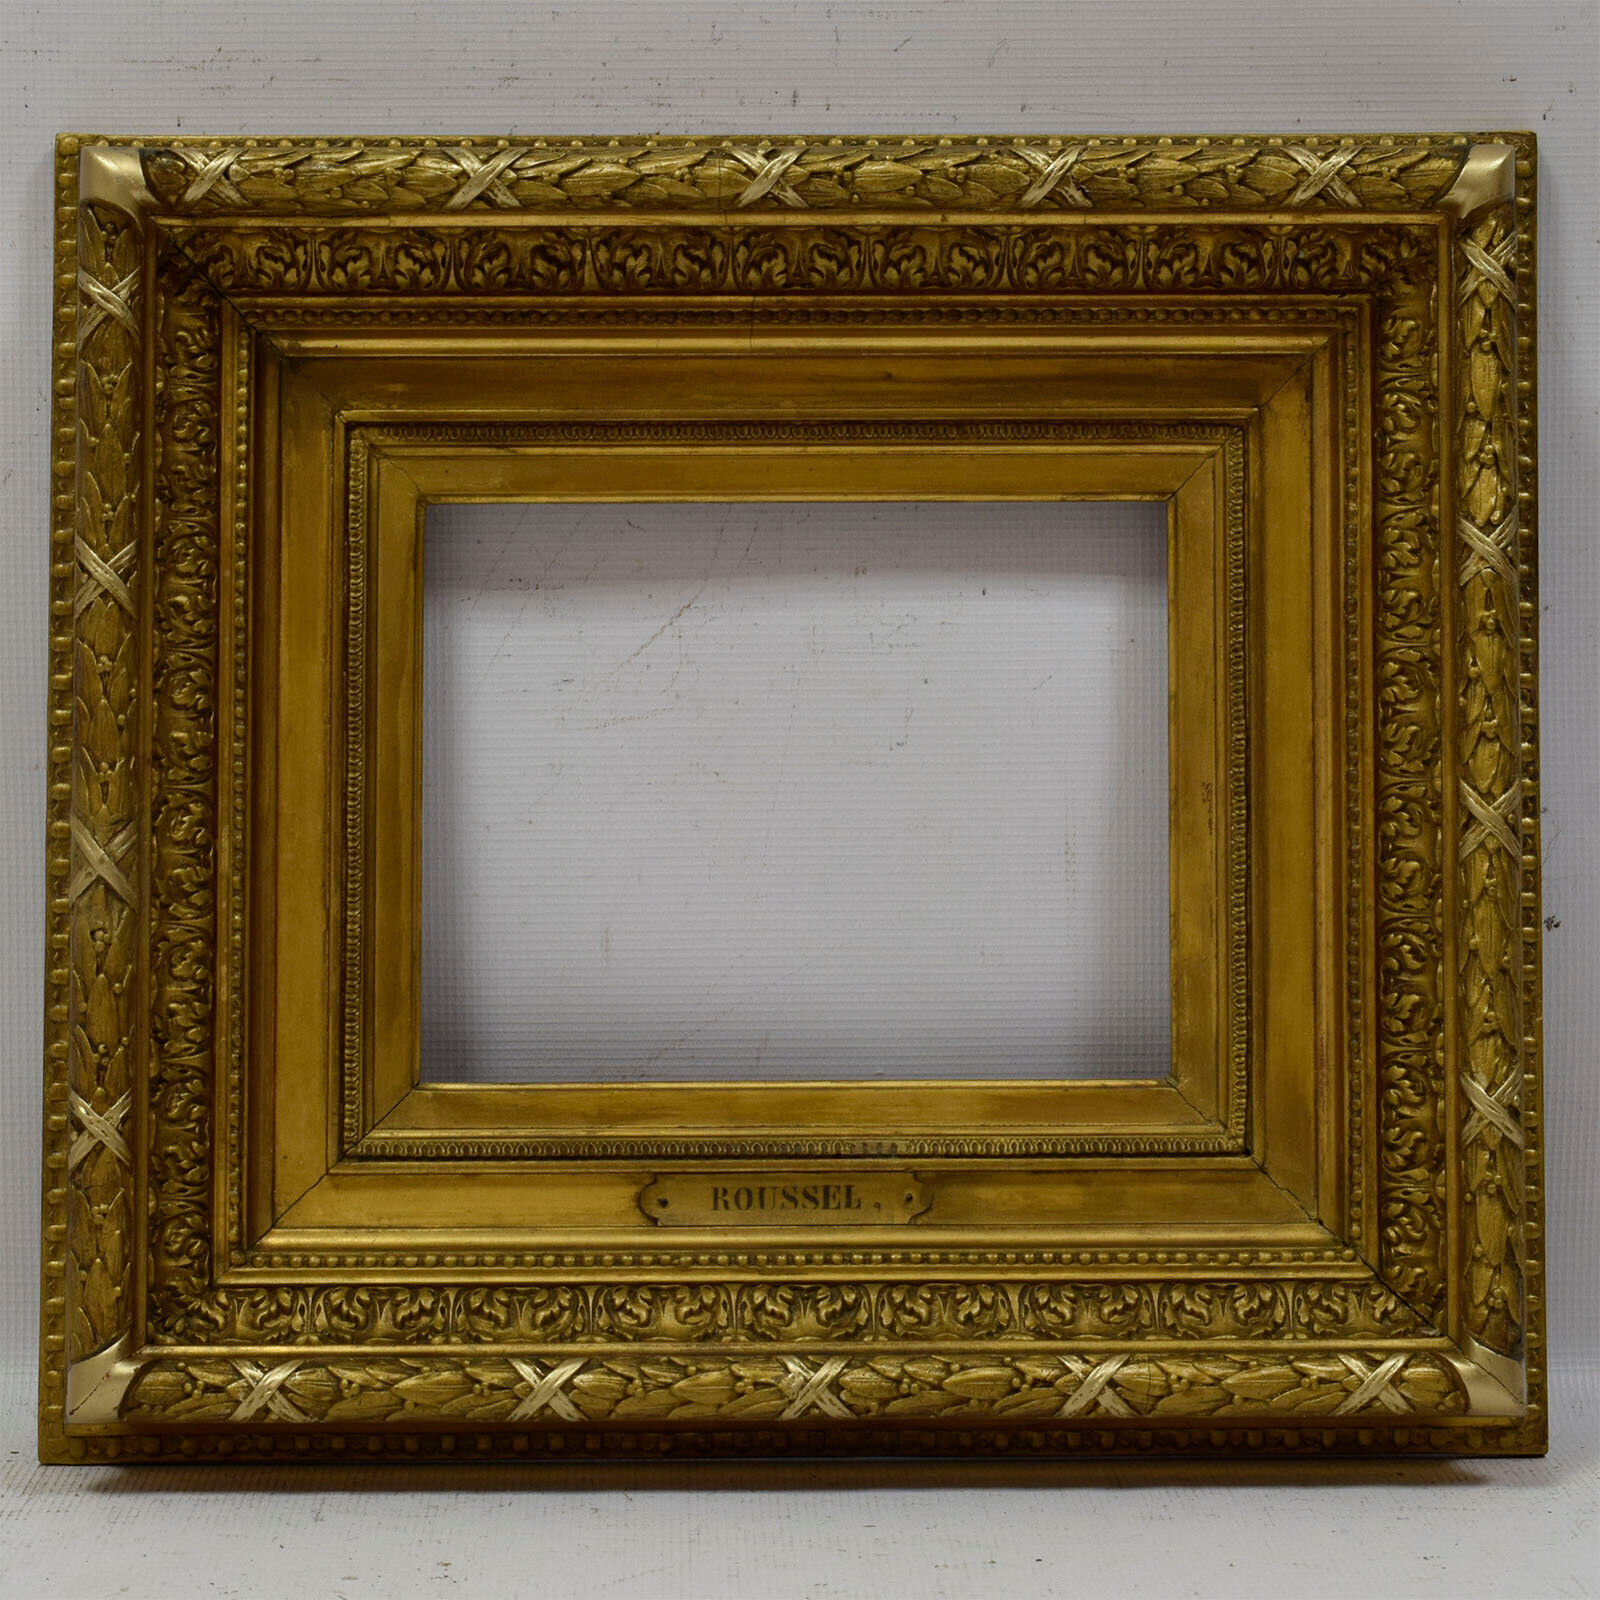 Ca. 1850-1900 Old wooden frame original condition Internal: 10.4x8.2 in